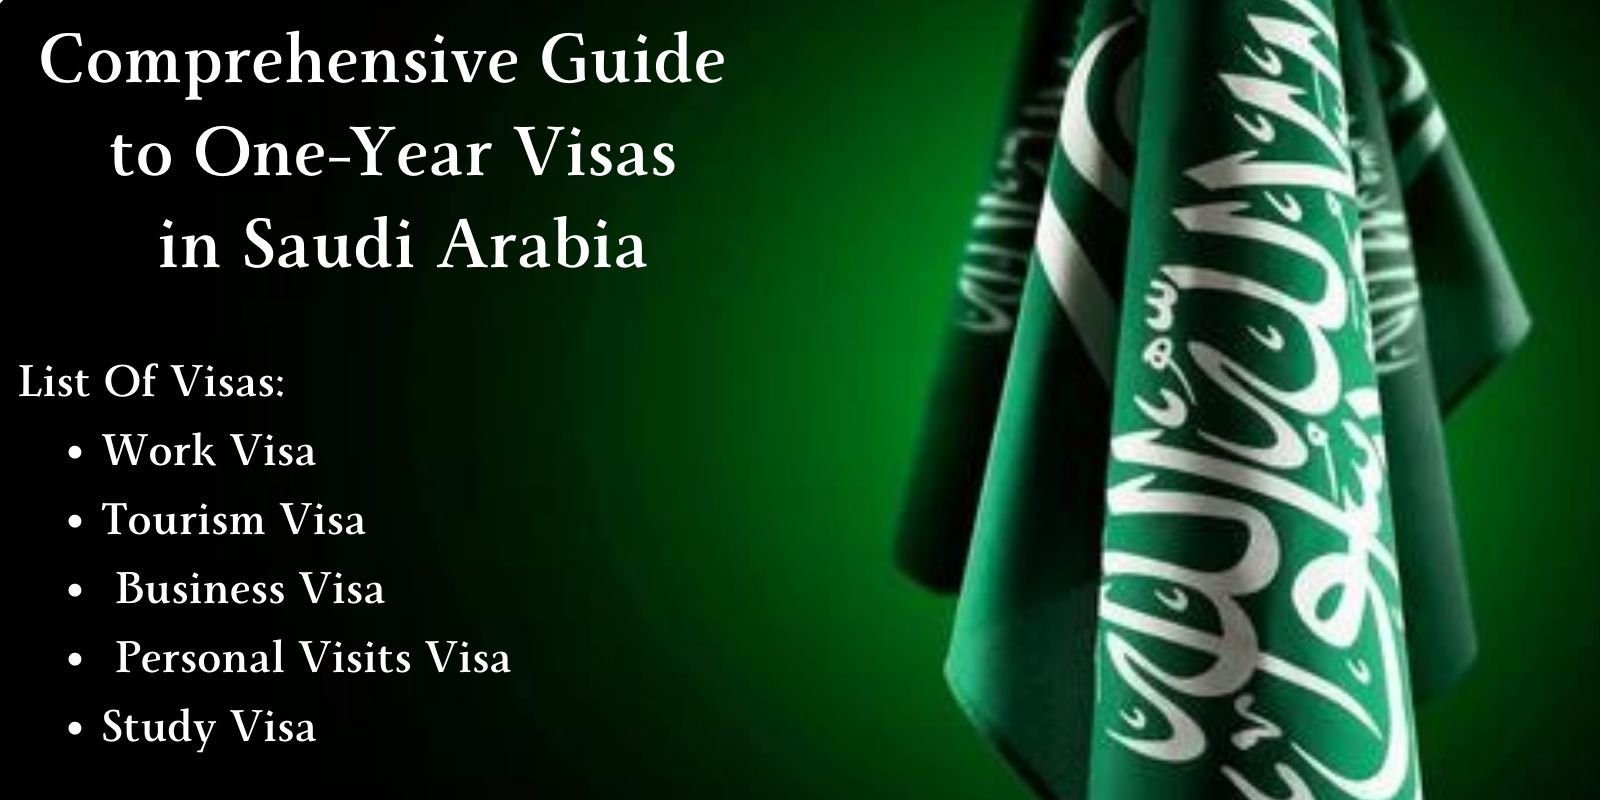 Complete Guide to One-Year Visas in Saudi Arabia